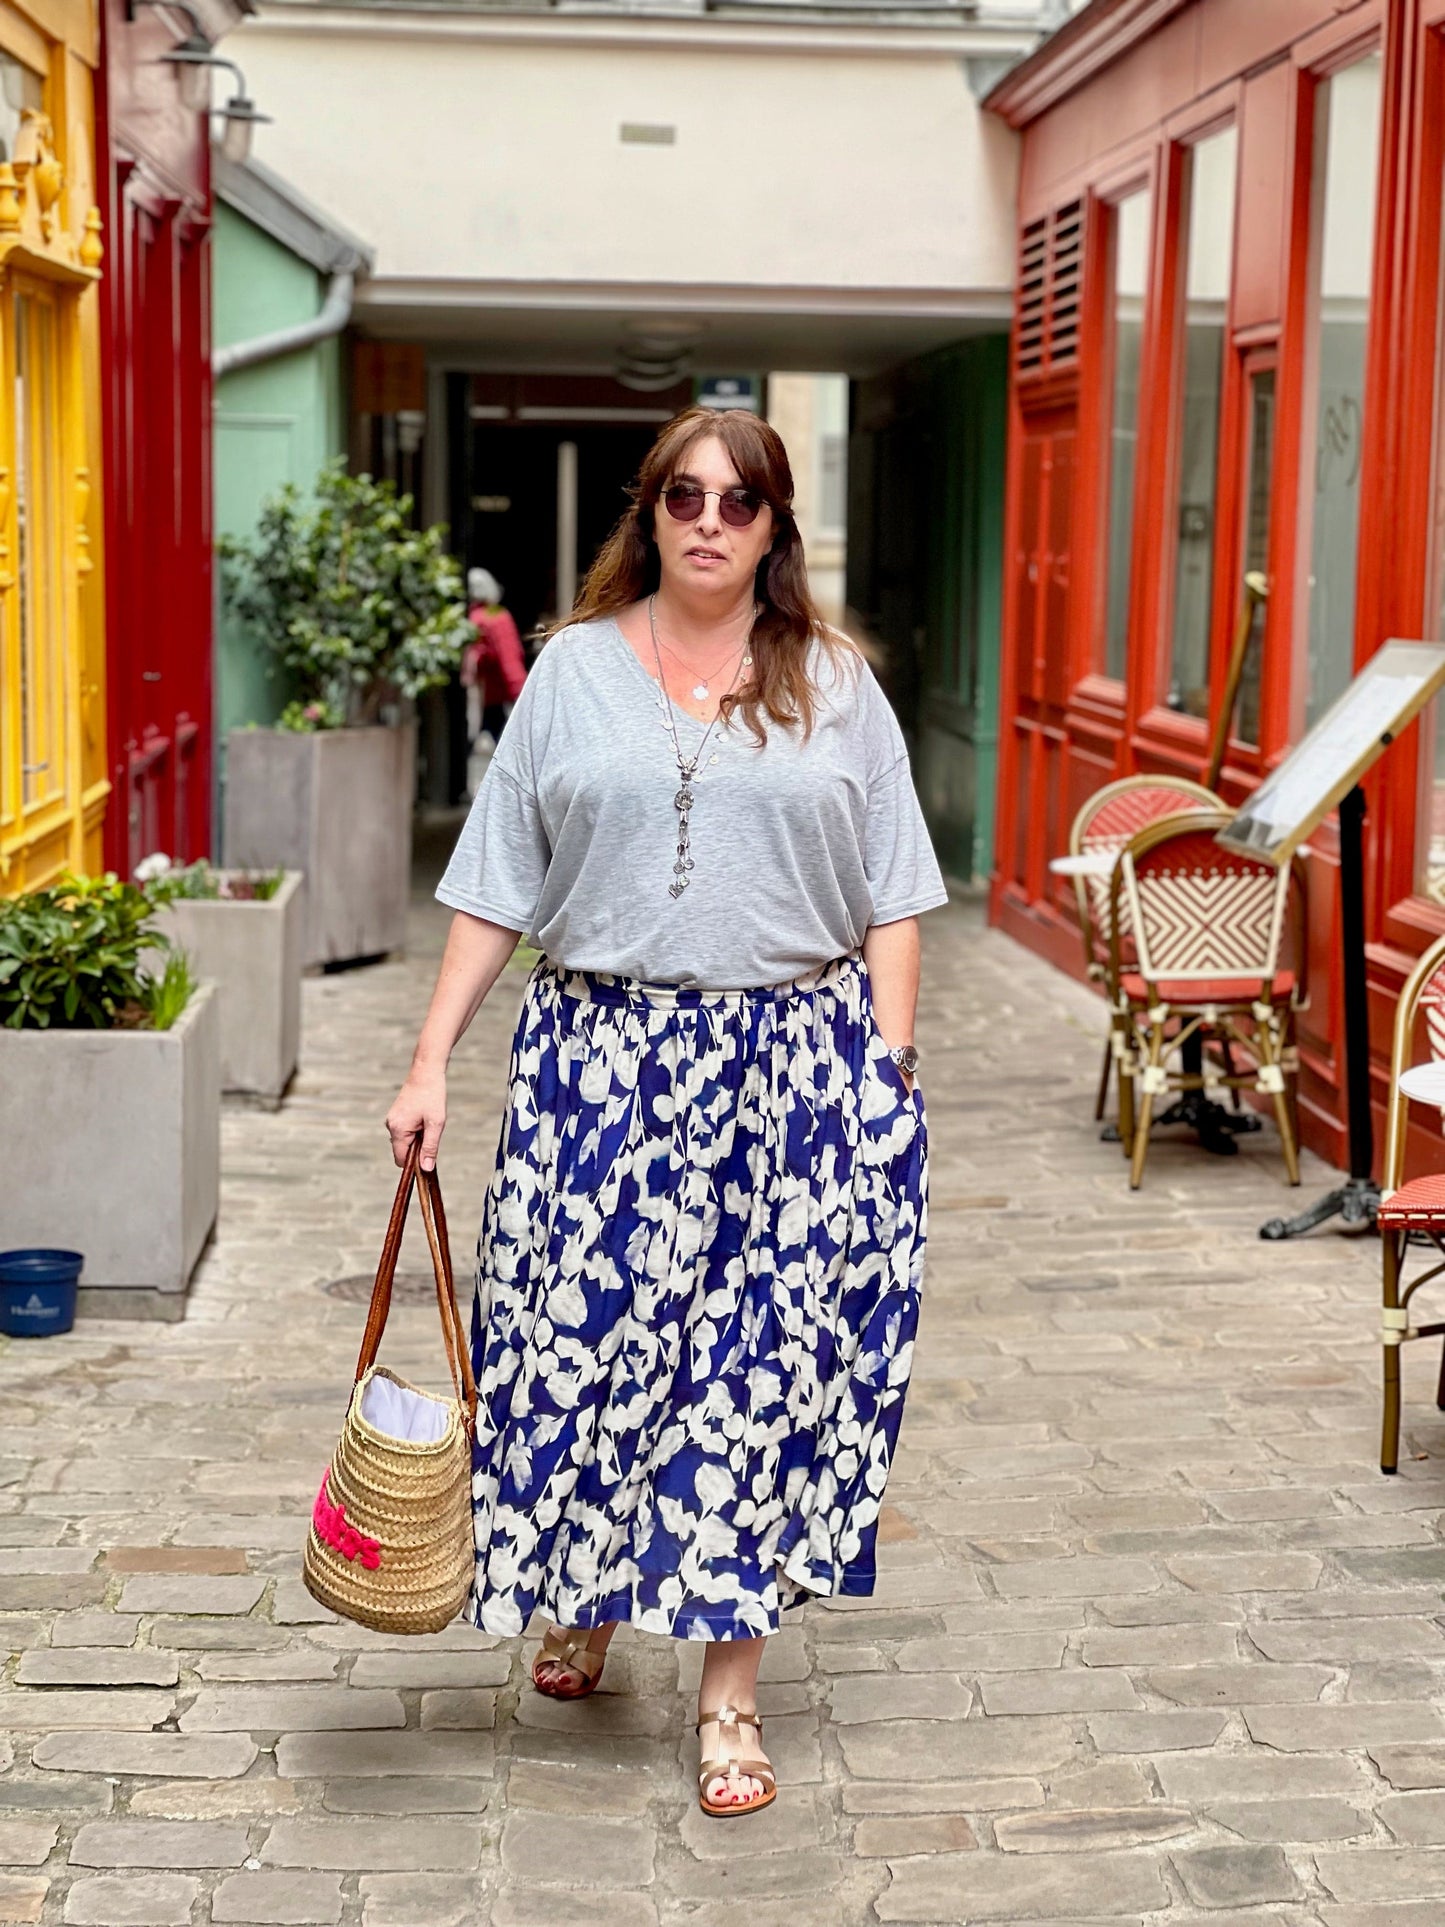 Blue and white printed maxi skirt worn with grey tee shirt